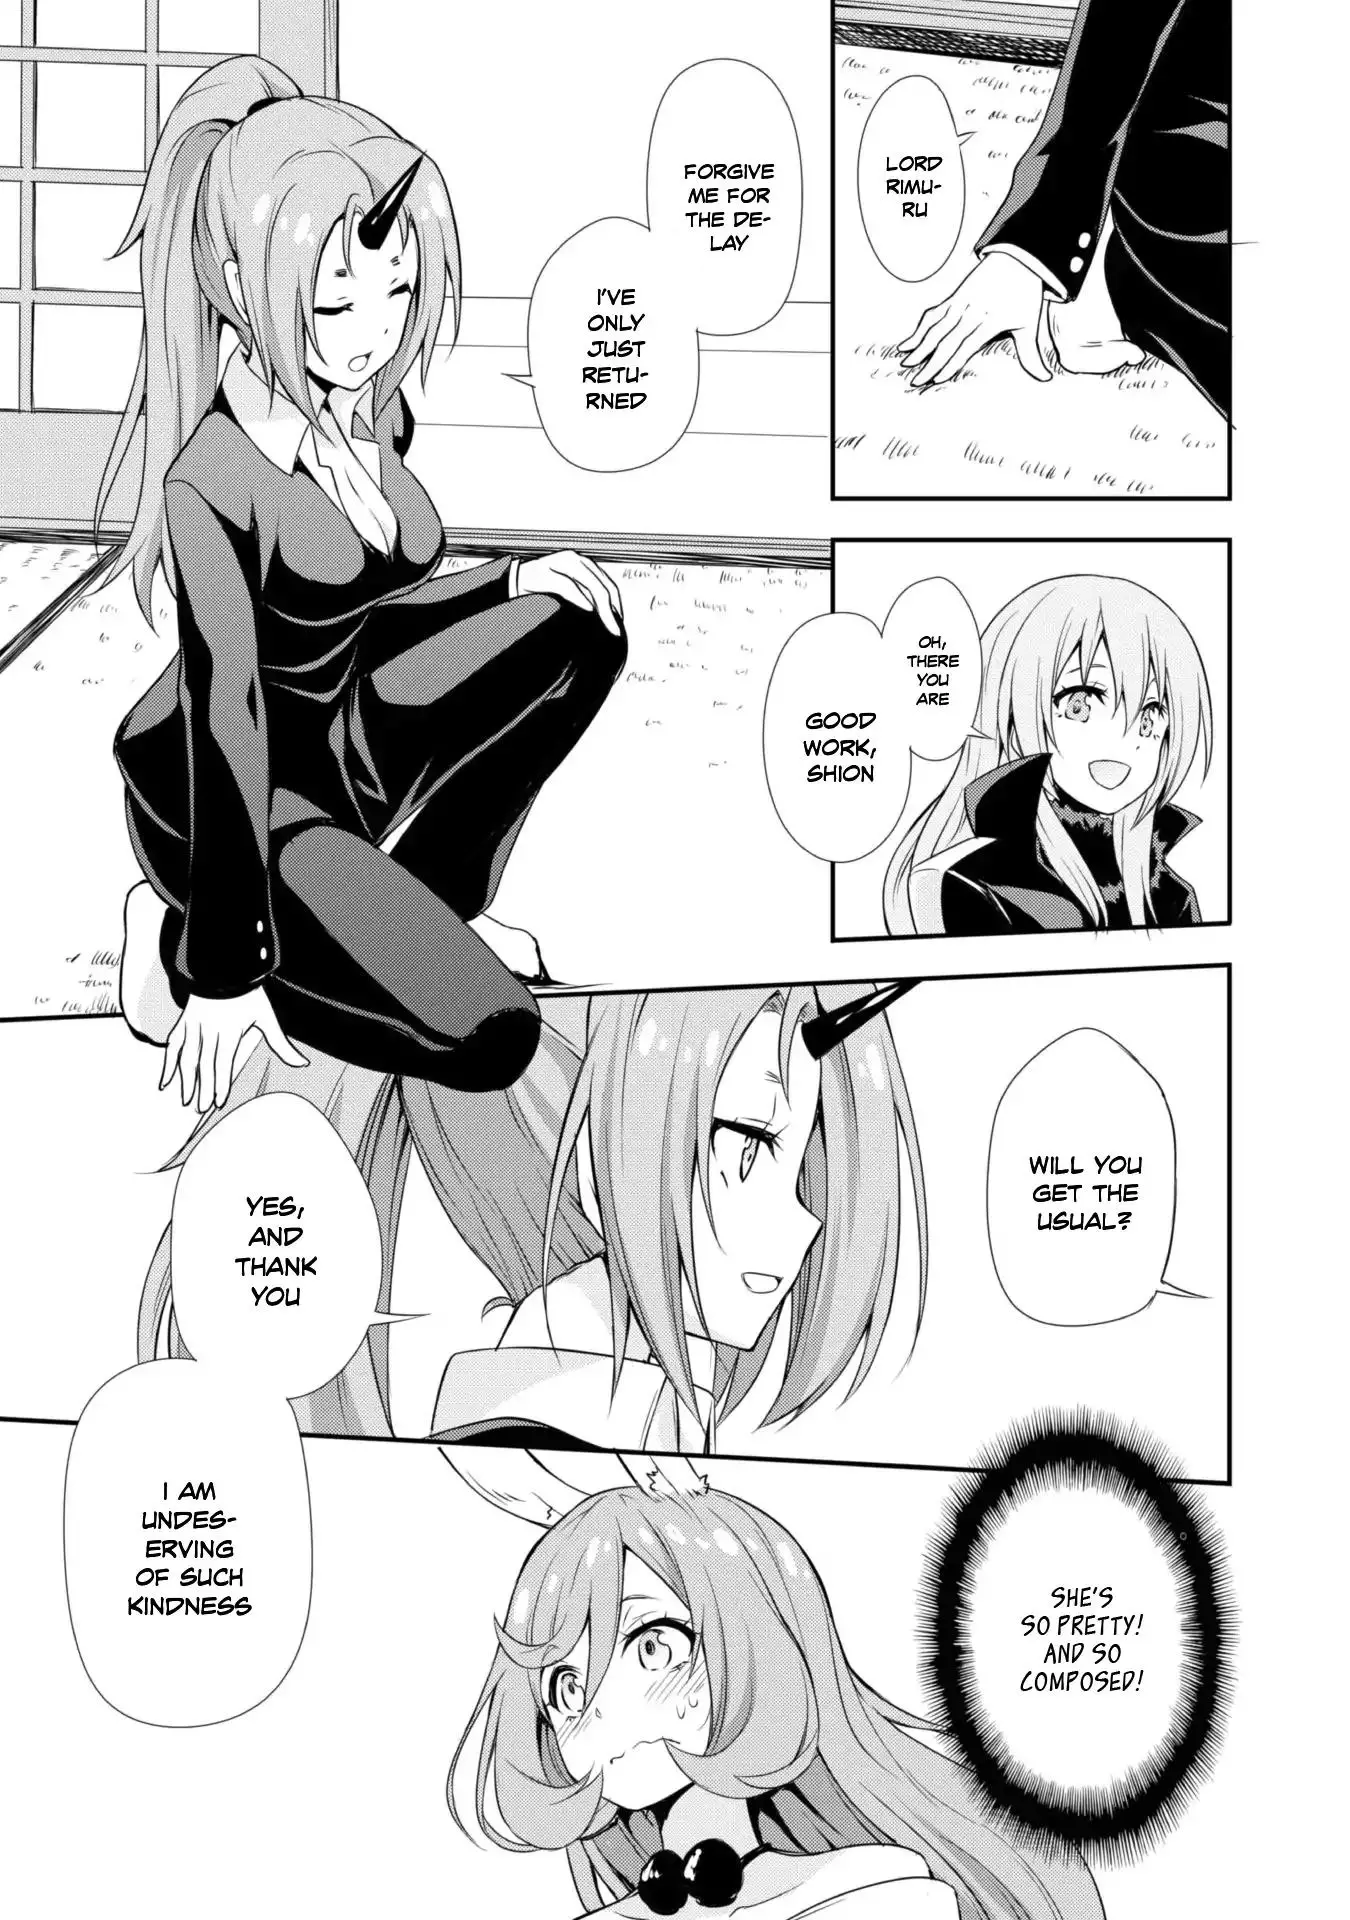 Tensei Shitara Slime Datta Ken: The Ways of Strolling in the Demon Country - 5 page 12